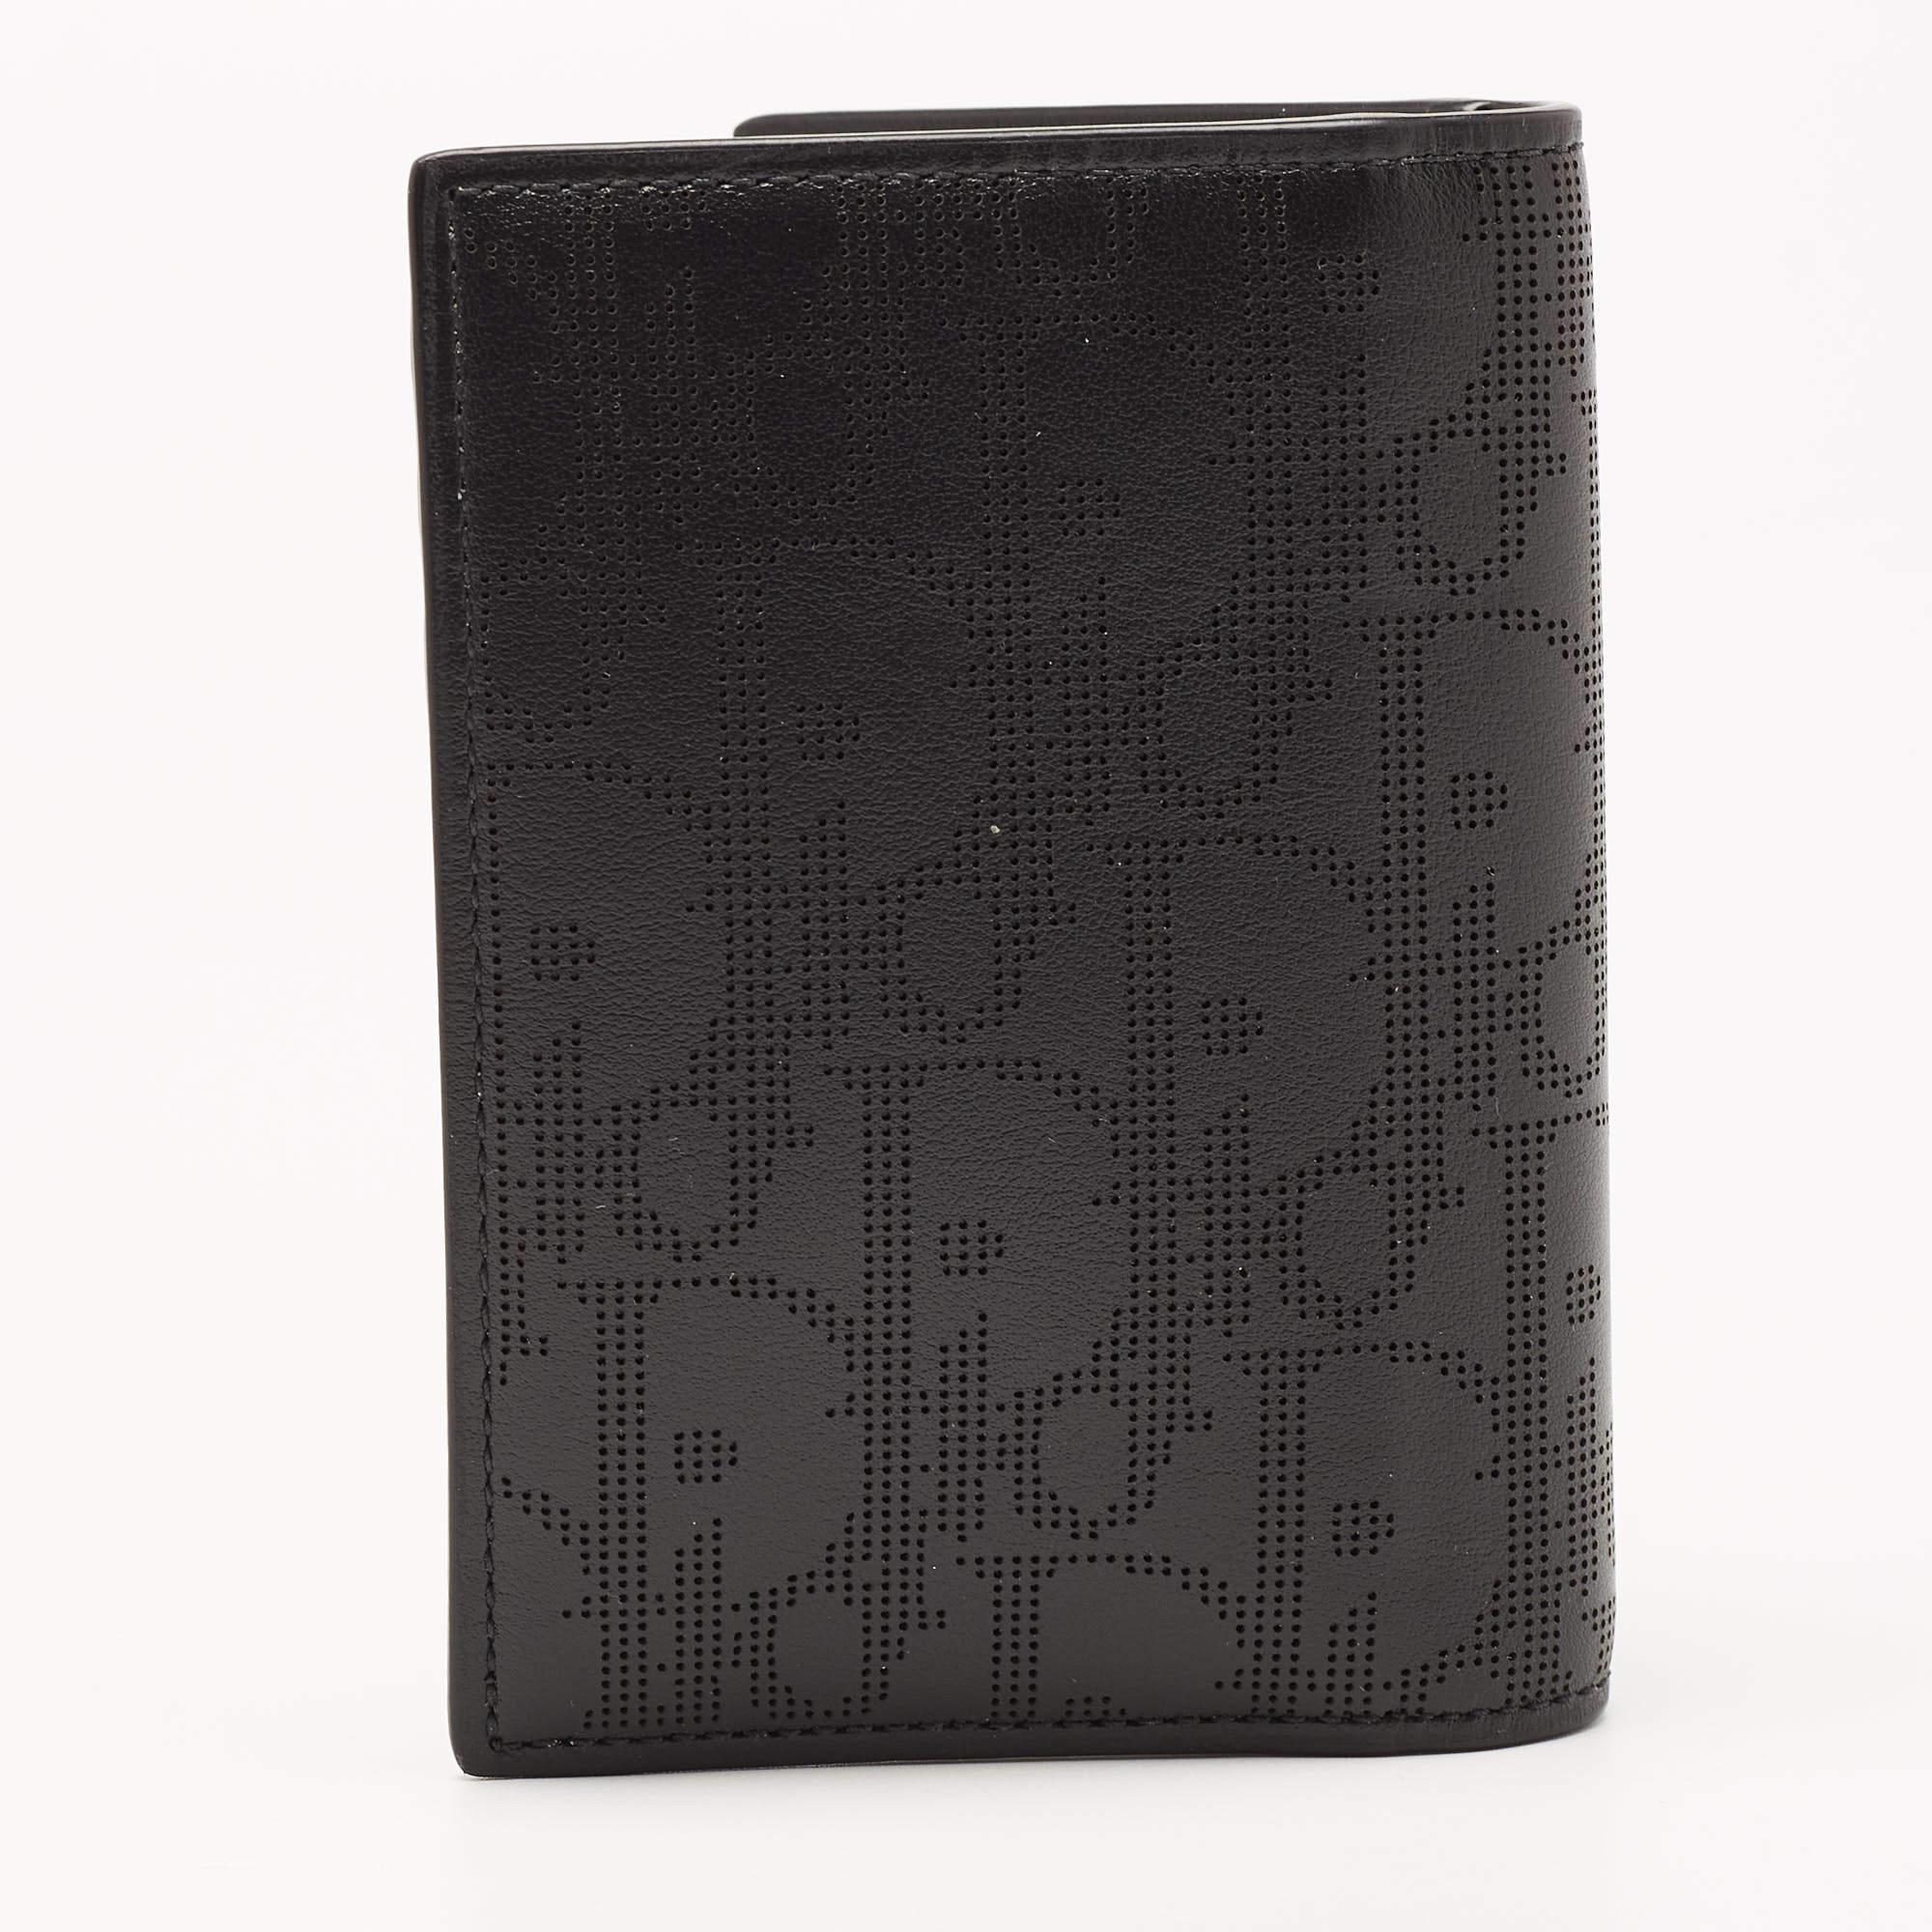 This Dior stylish and functional cardholder is a must-have in your collection. It is equipped with multiple, well-lined slots to hold your cards.

